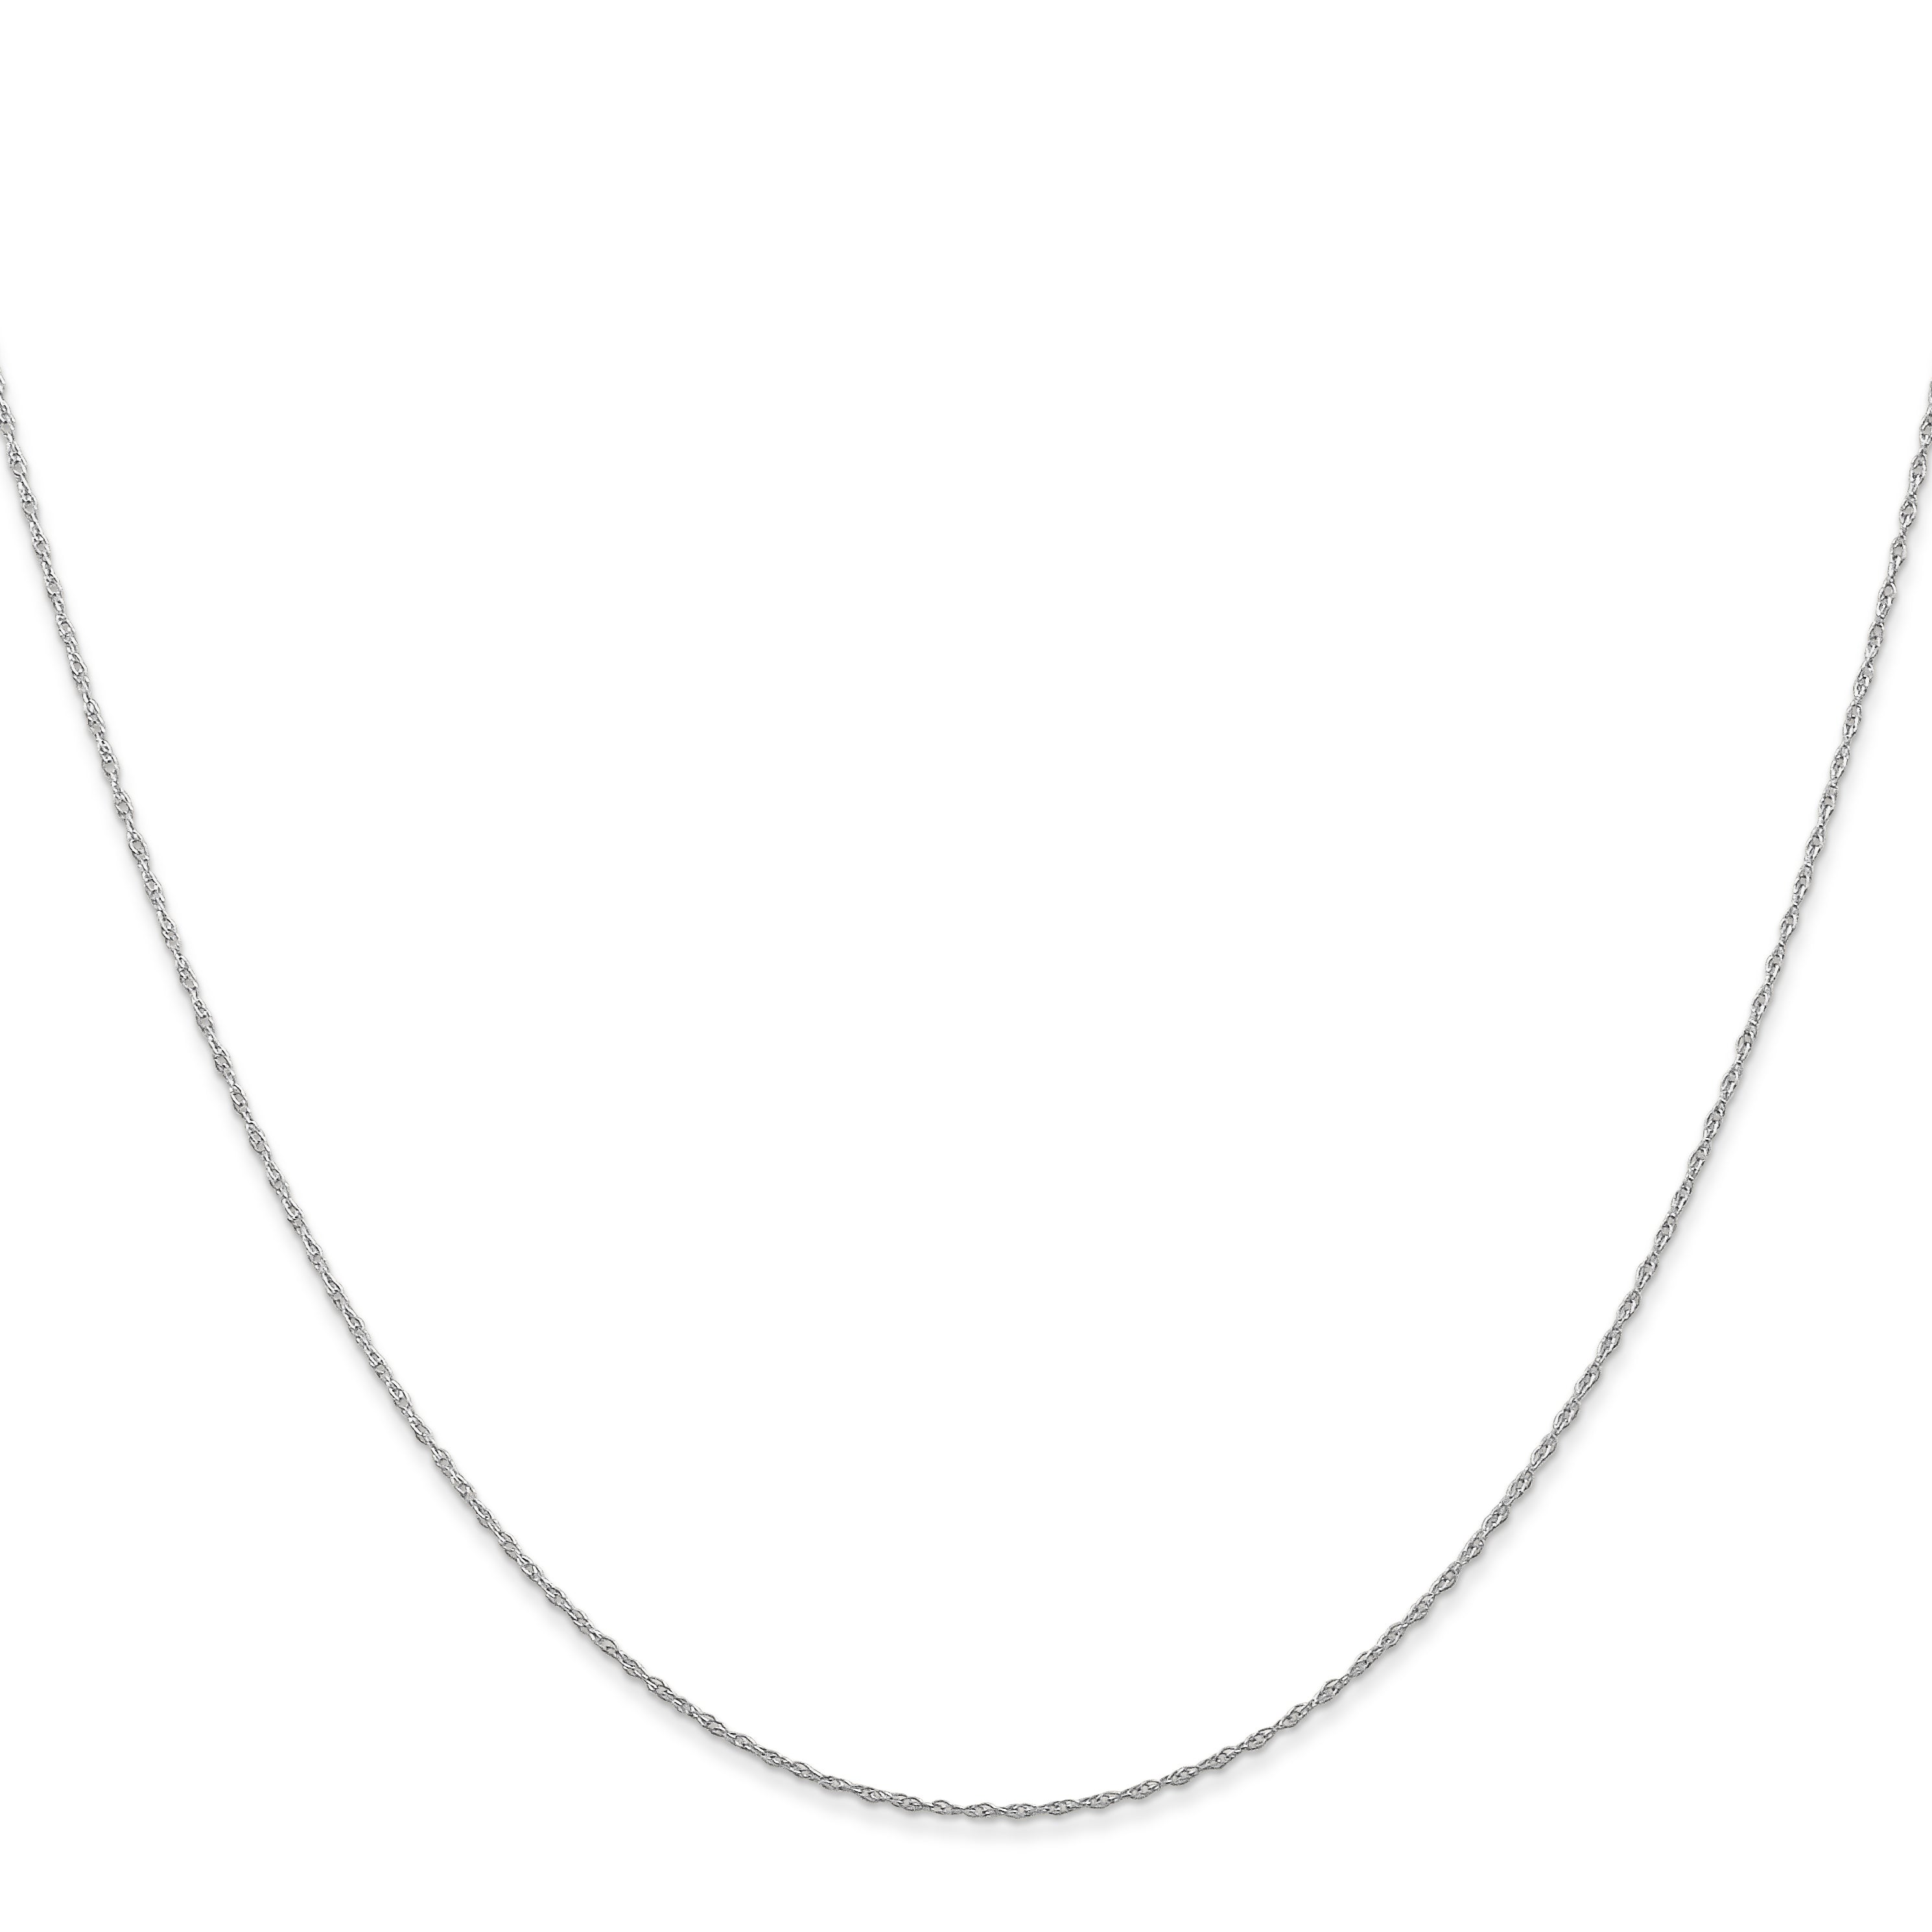 14K White Gold 13 inch Carded .5mm Cable Rope with Spring Ring Clasp Chain